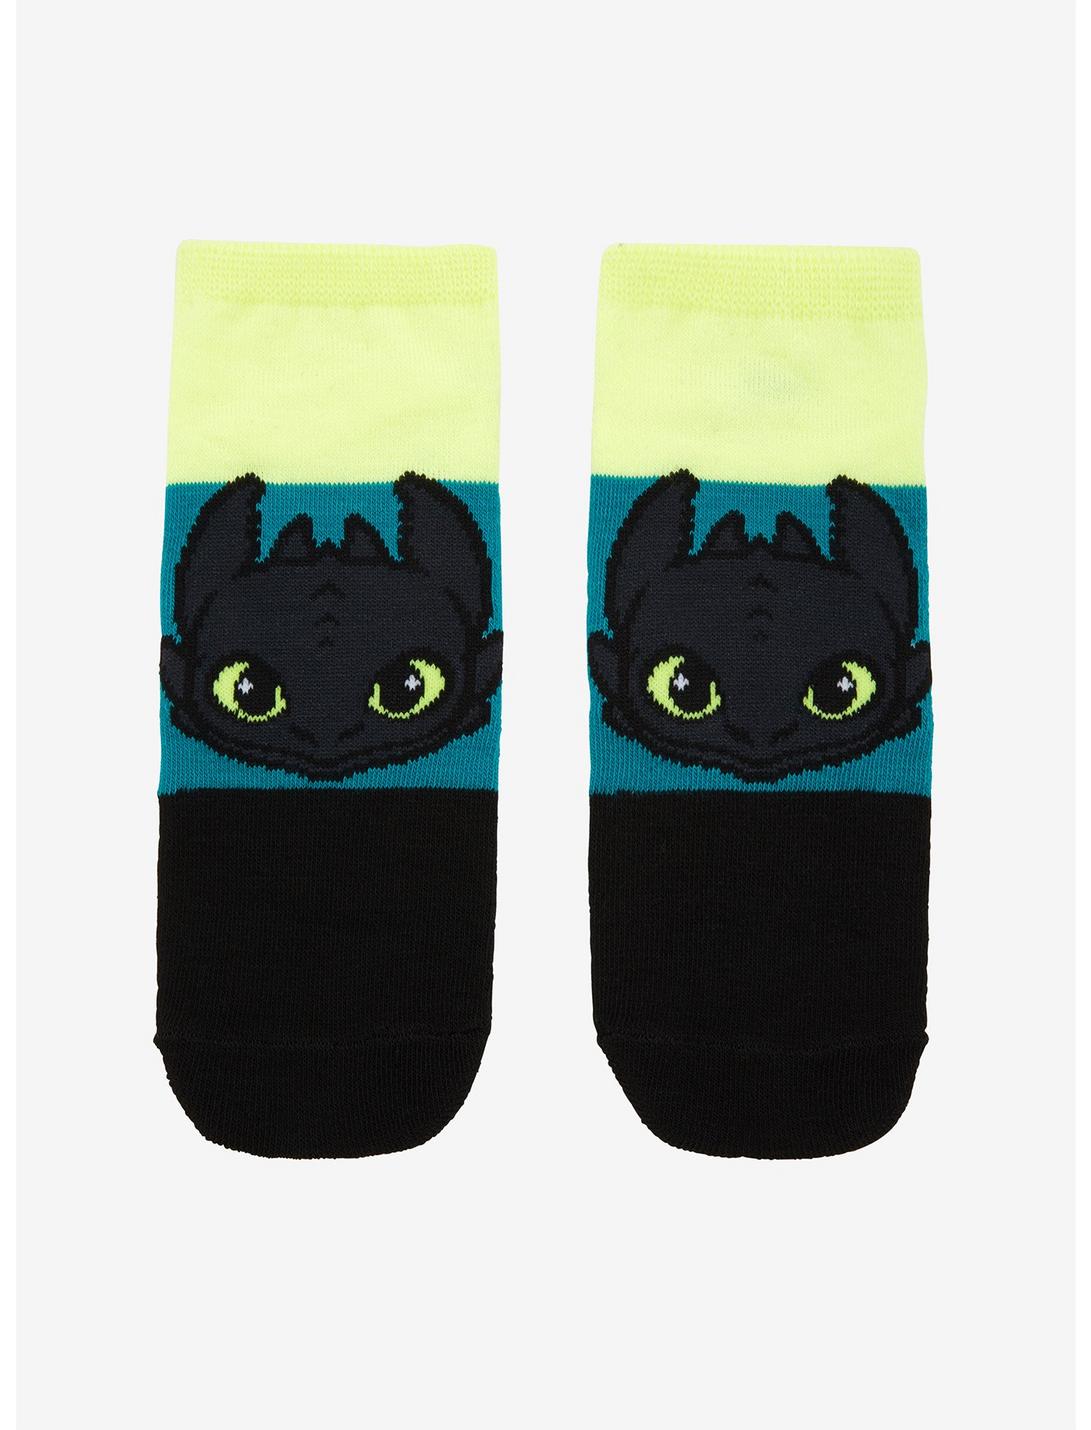 How To Train Your Dragon Toothless No-Show Socks, , hi-res